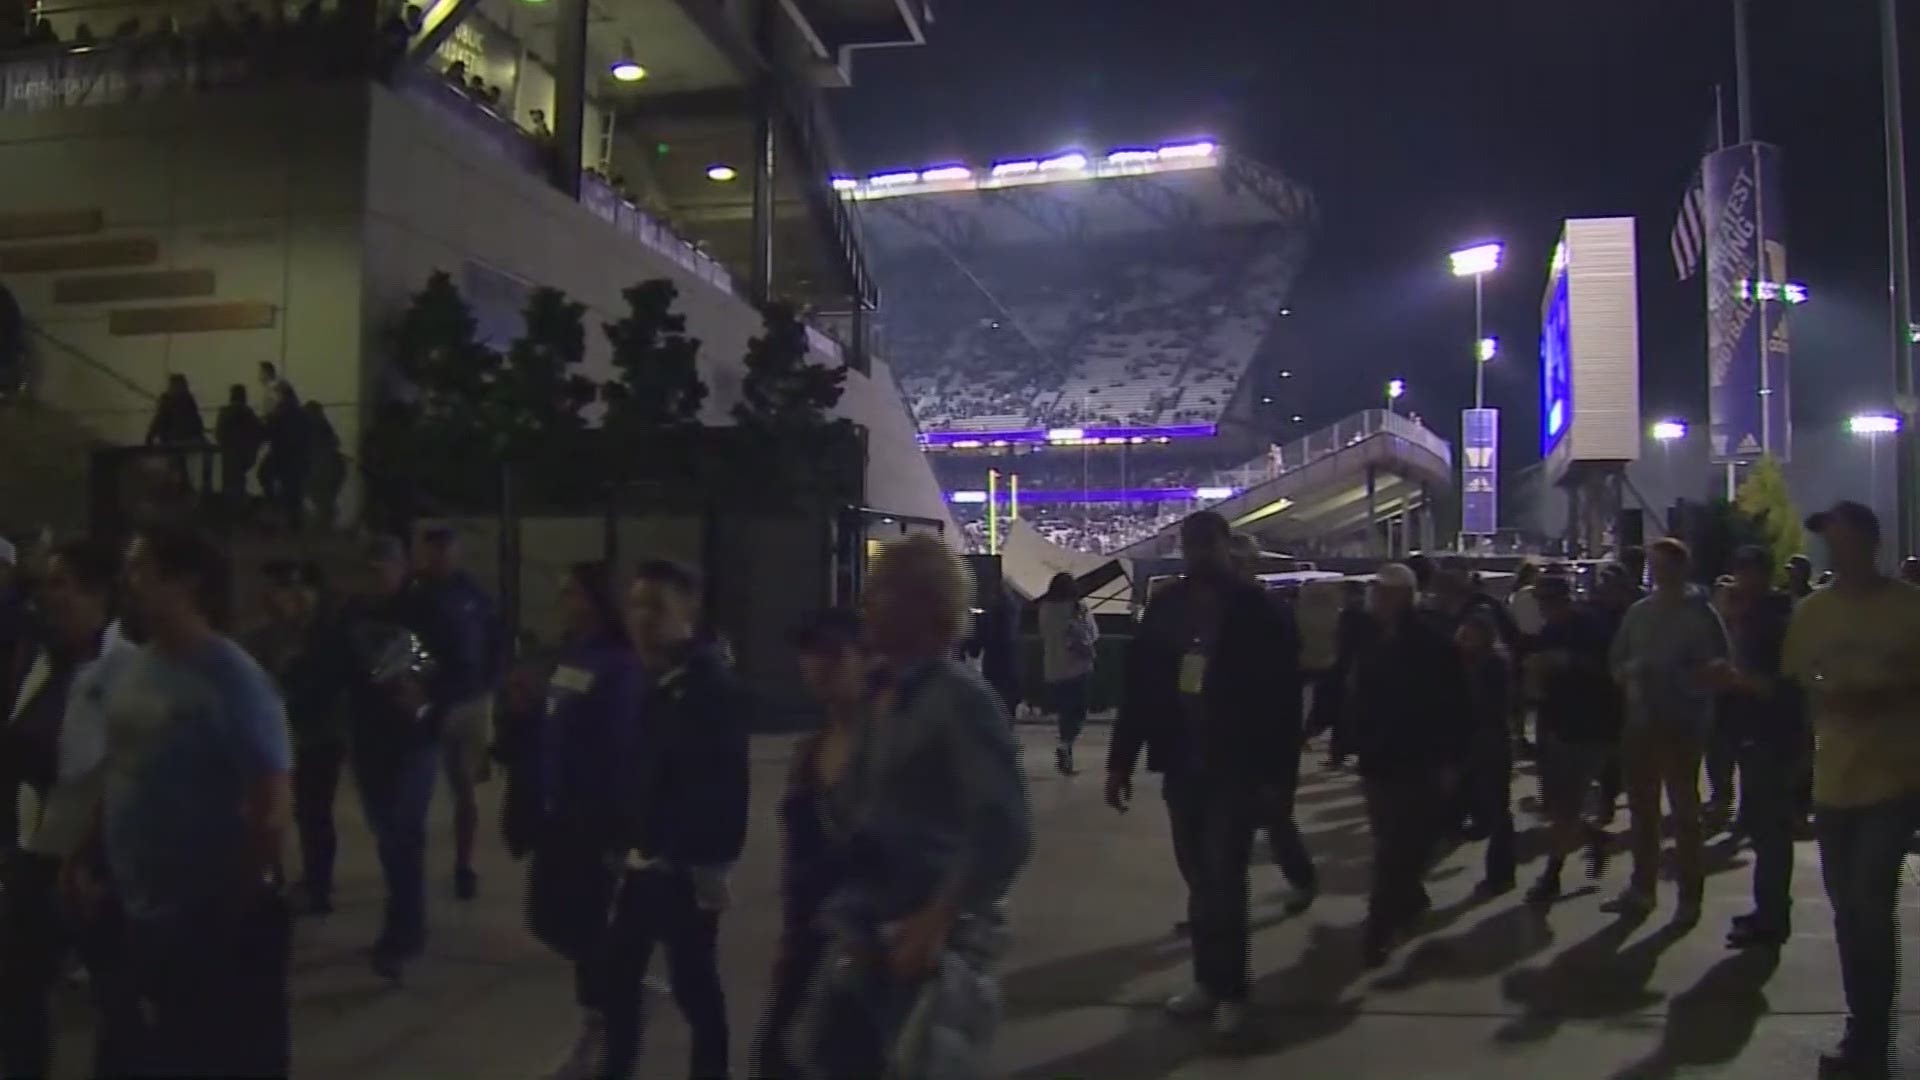 The Huskies played the Cal Bears Saturday night, but the game was interrupted by a weather delay.